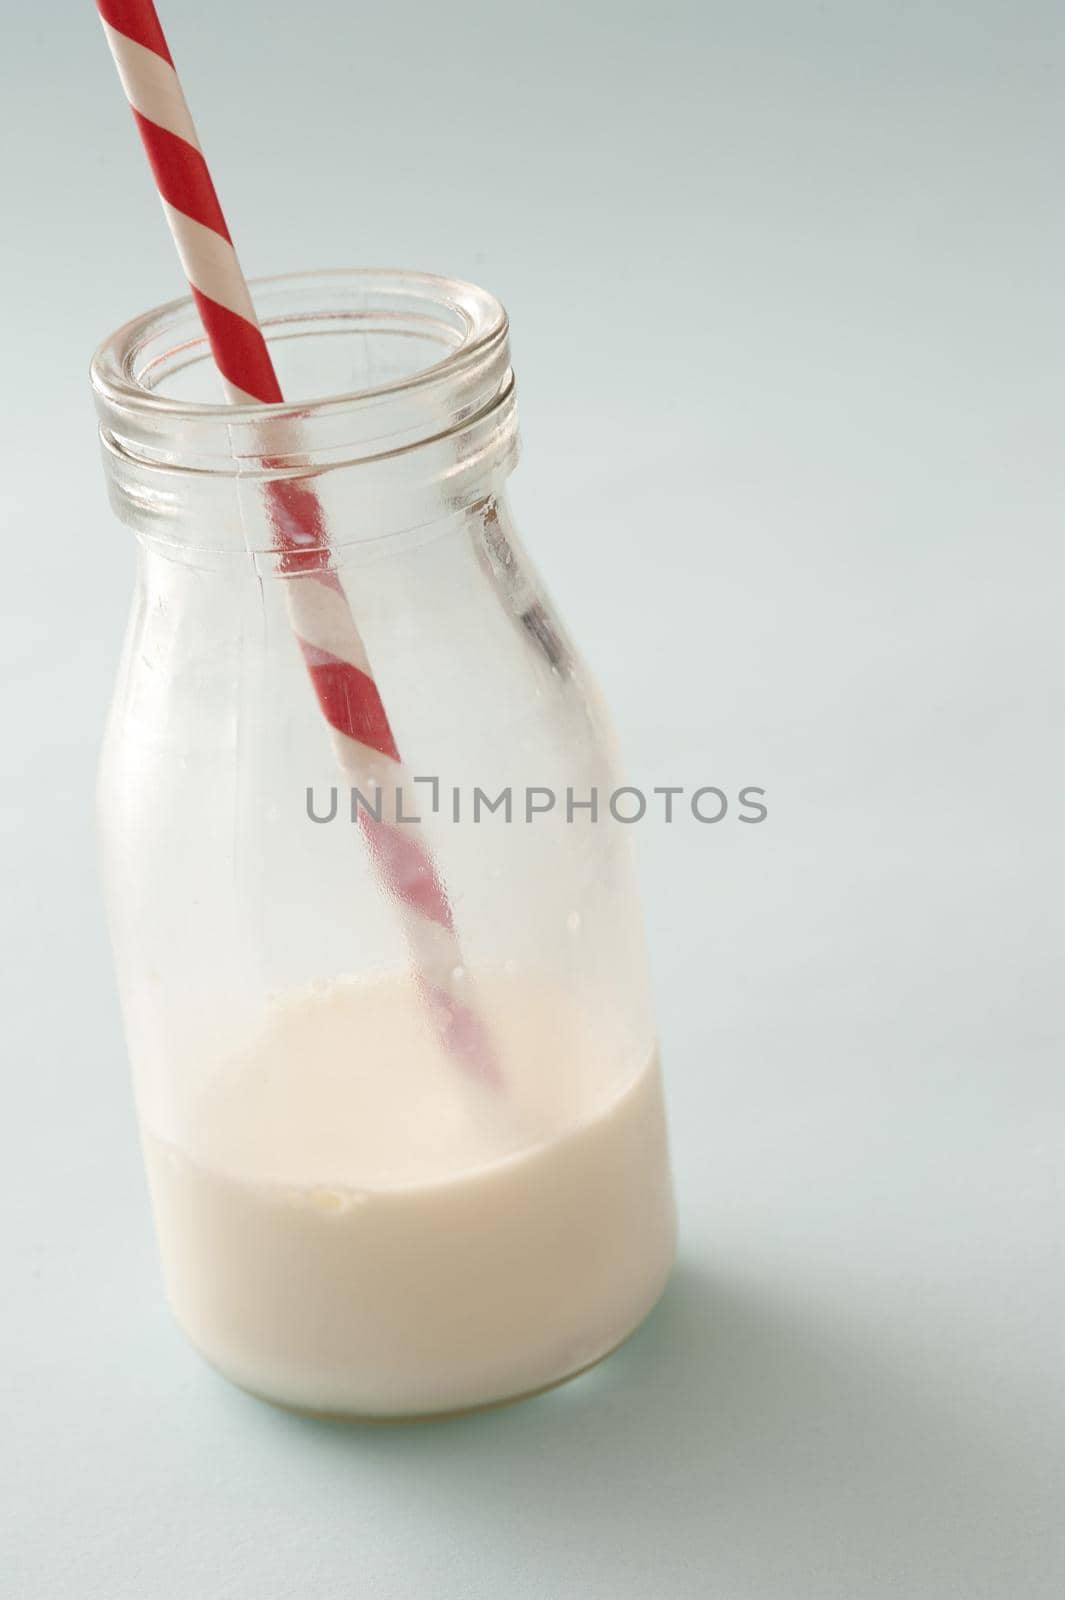 Small blank glass jar half full with whole milk and red and white straw over neutral background